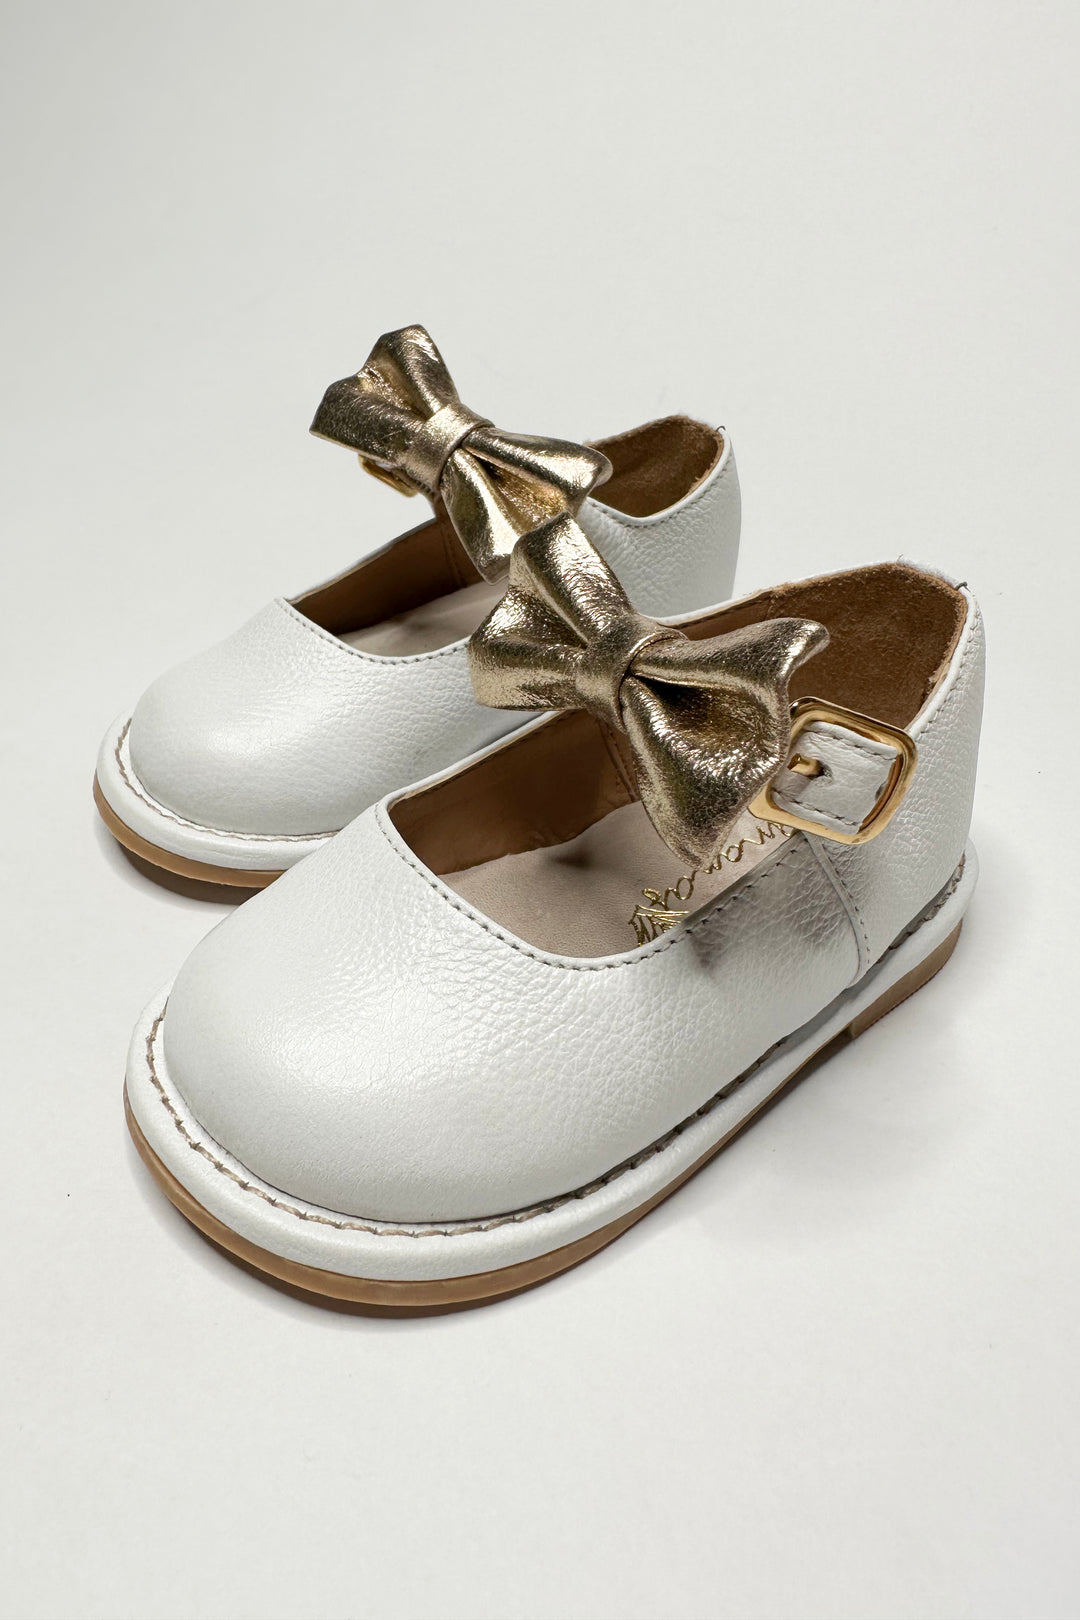 Ananás Petit "Beth" White Leather Bow Shoes | Millie and John